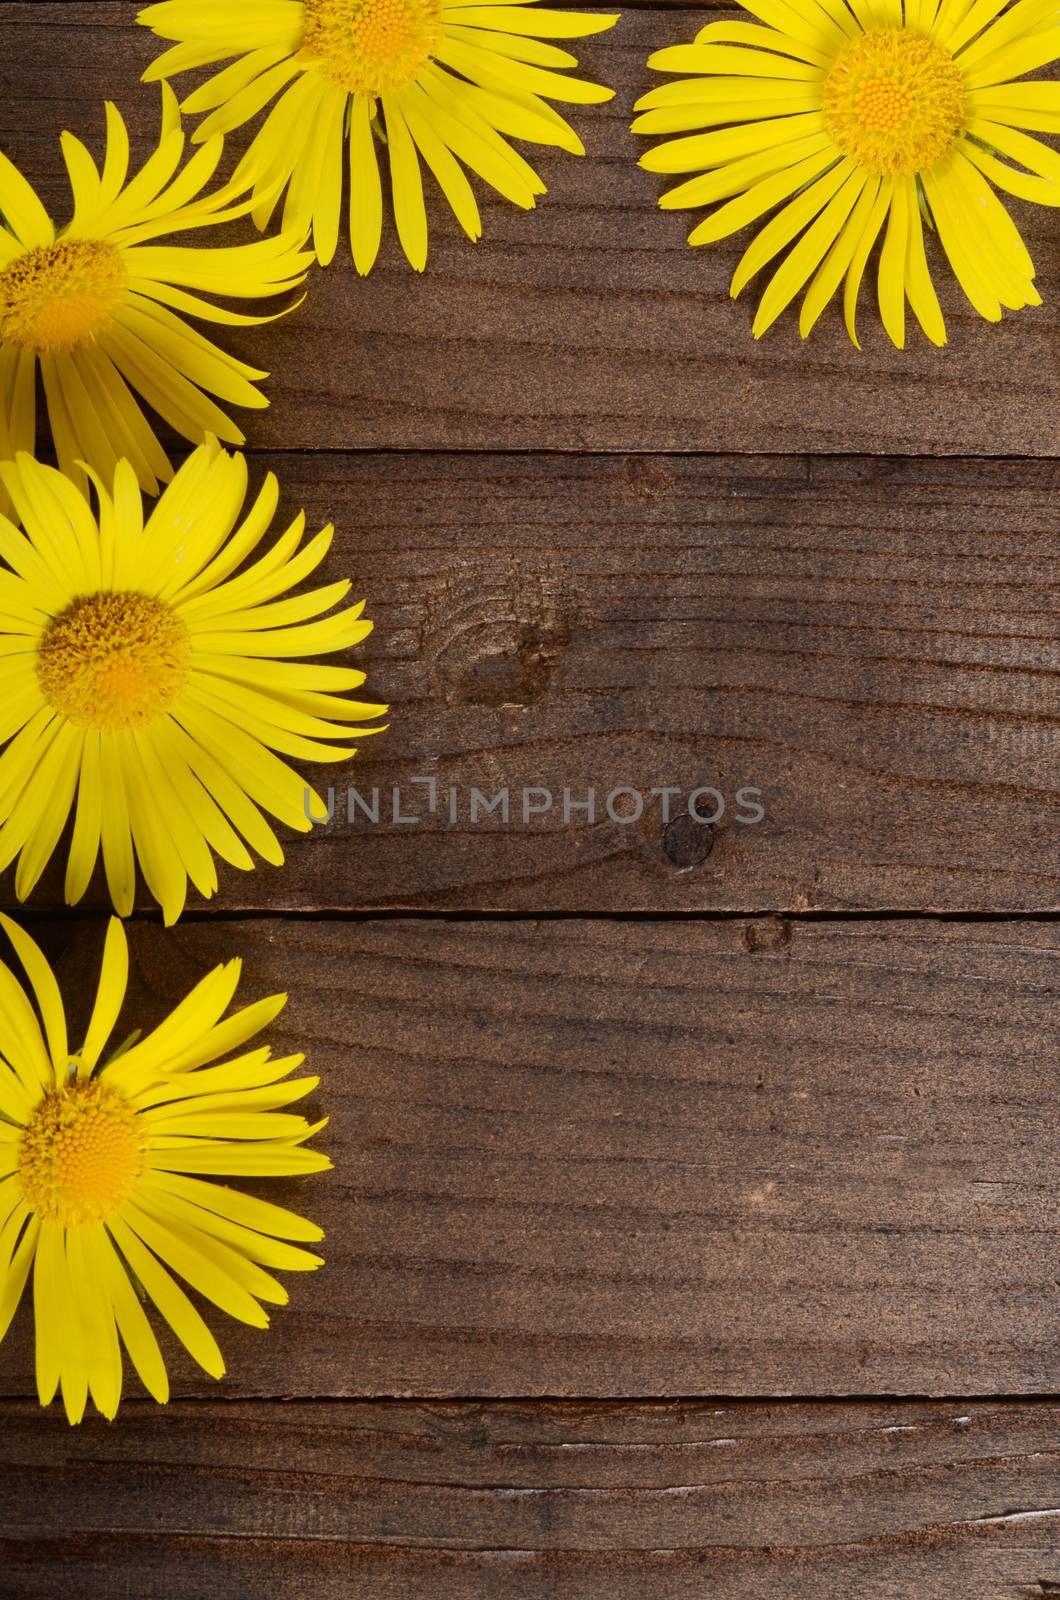 Yellow chamomile on wooden background by SvetaVo